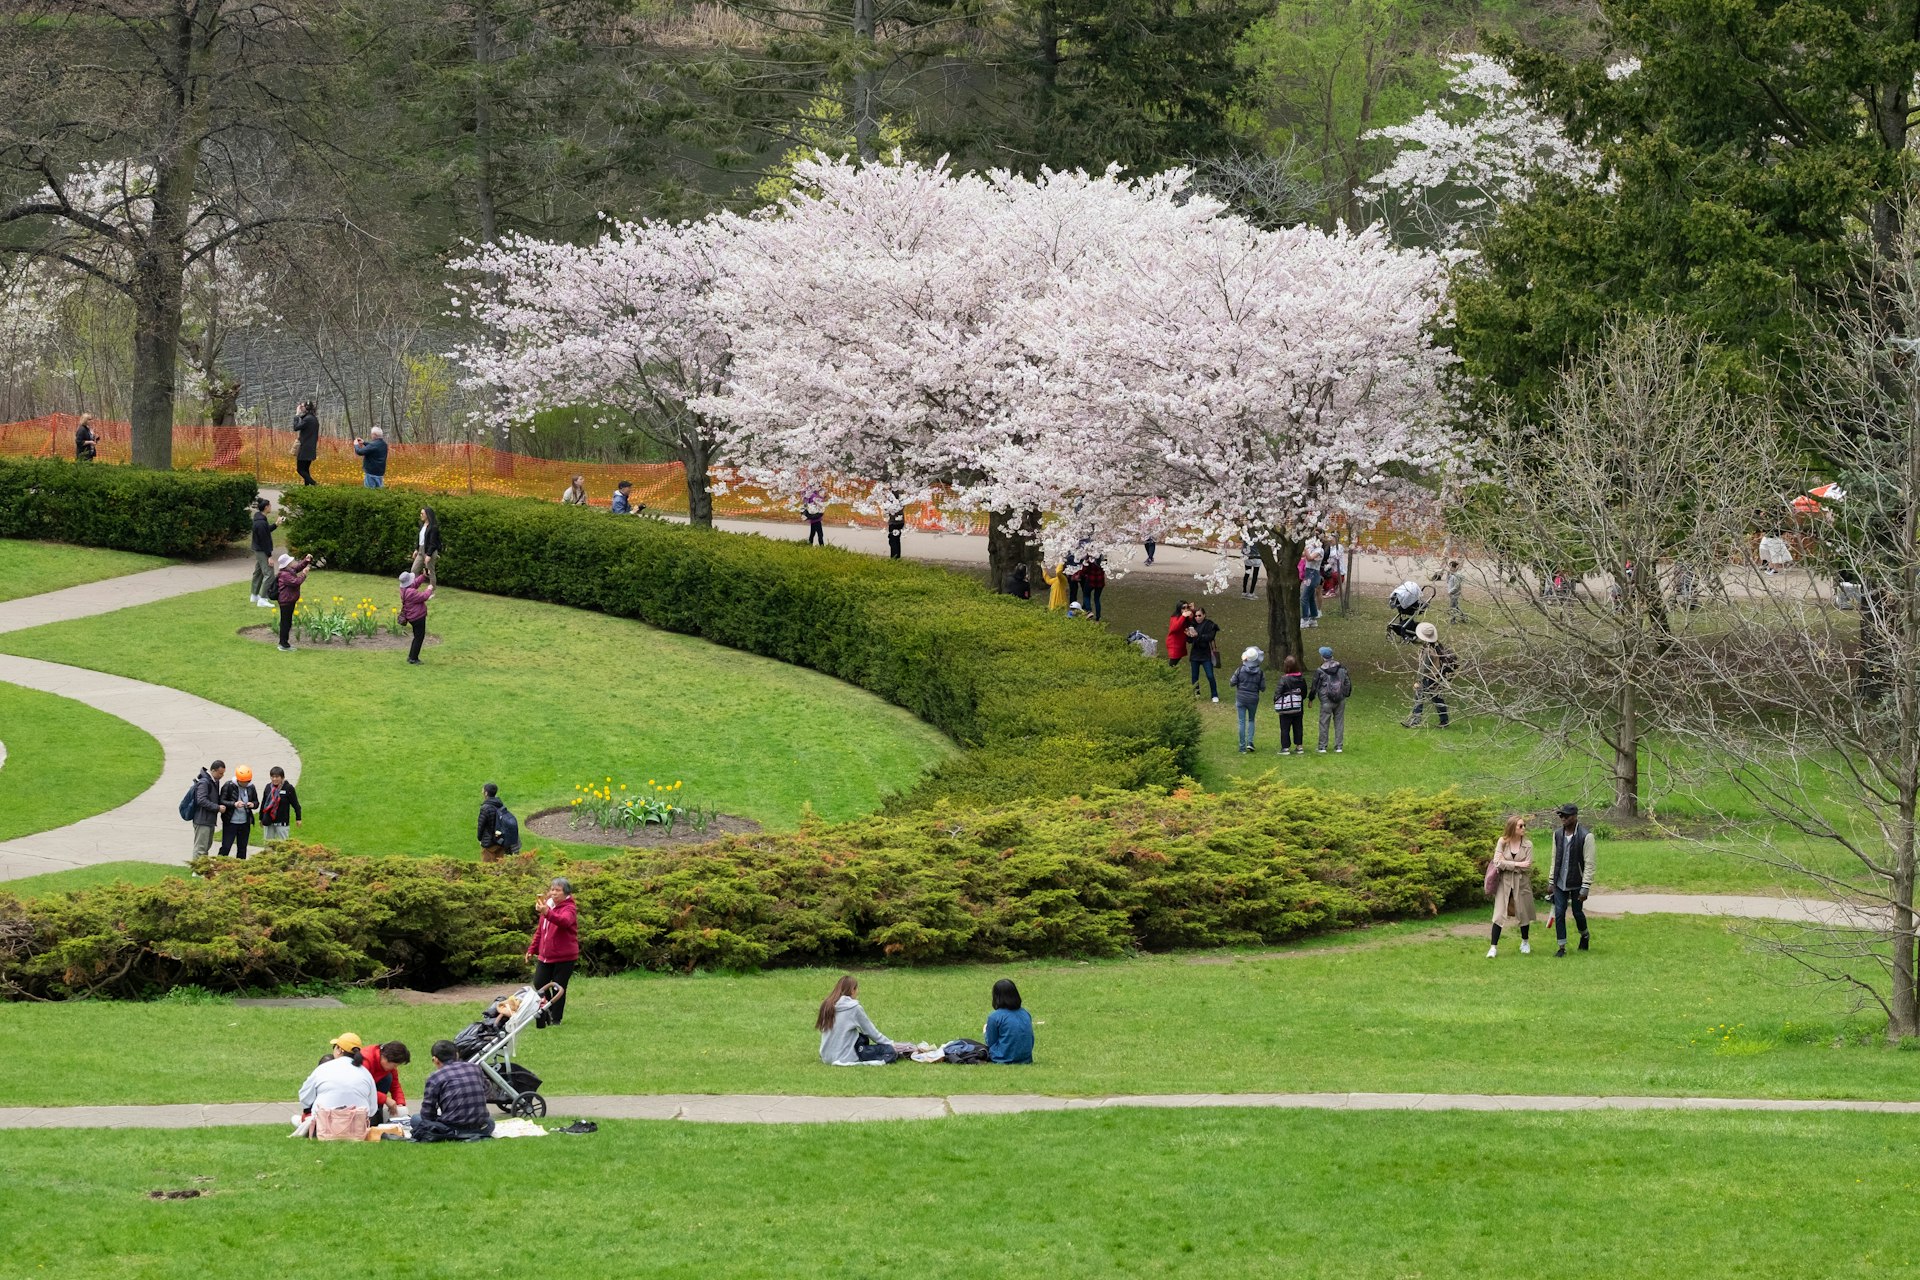 Spring scene of people enjoying the views of white full-bloom cherry blossoms at High Park, Toronto, Ontario, Canada